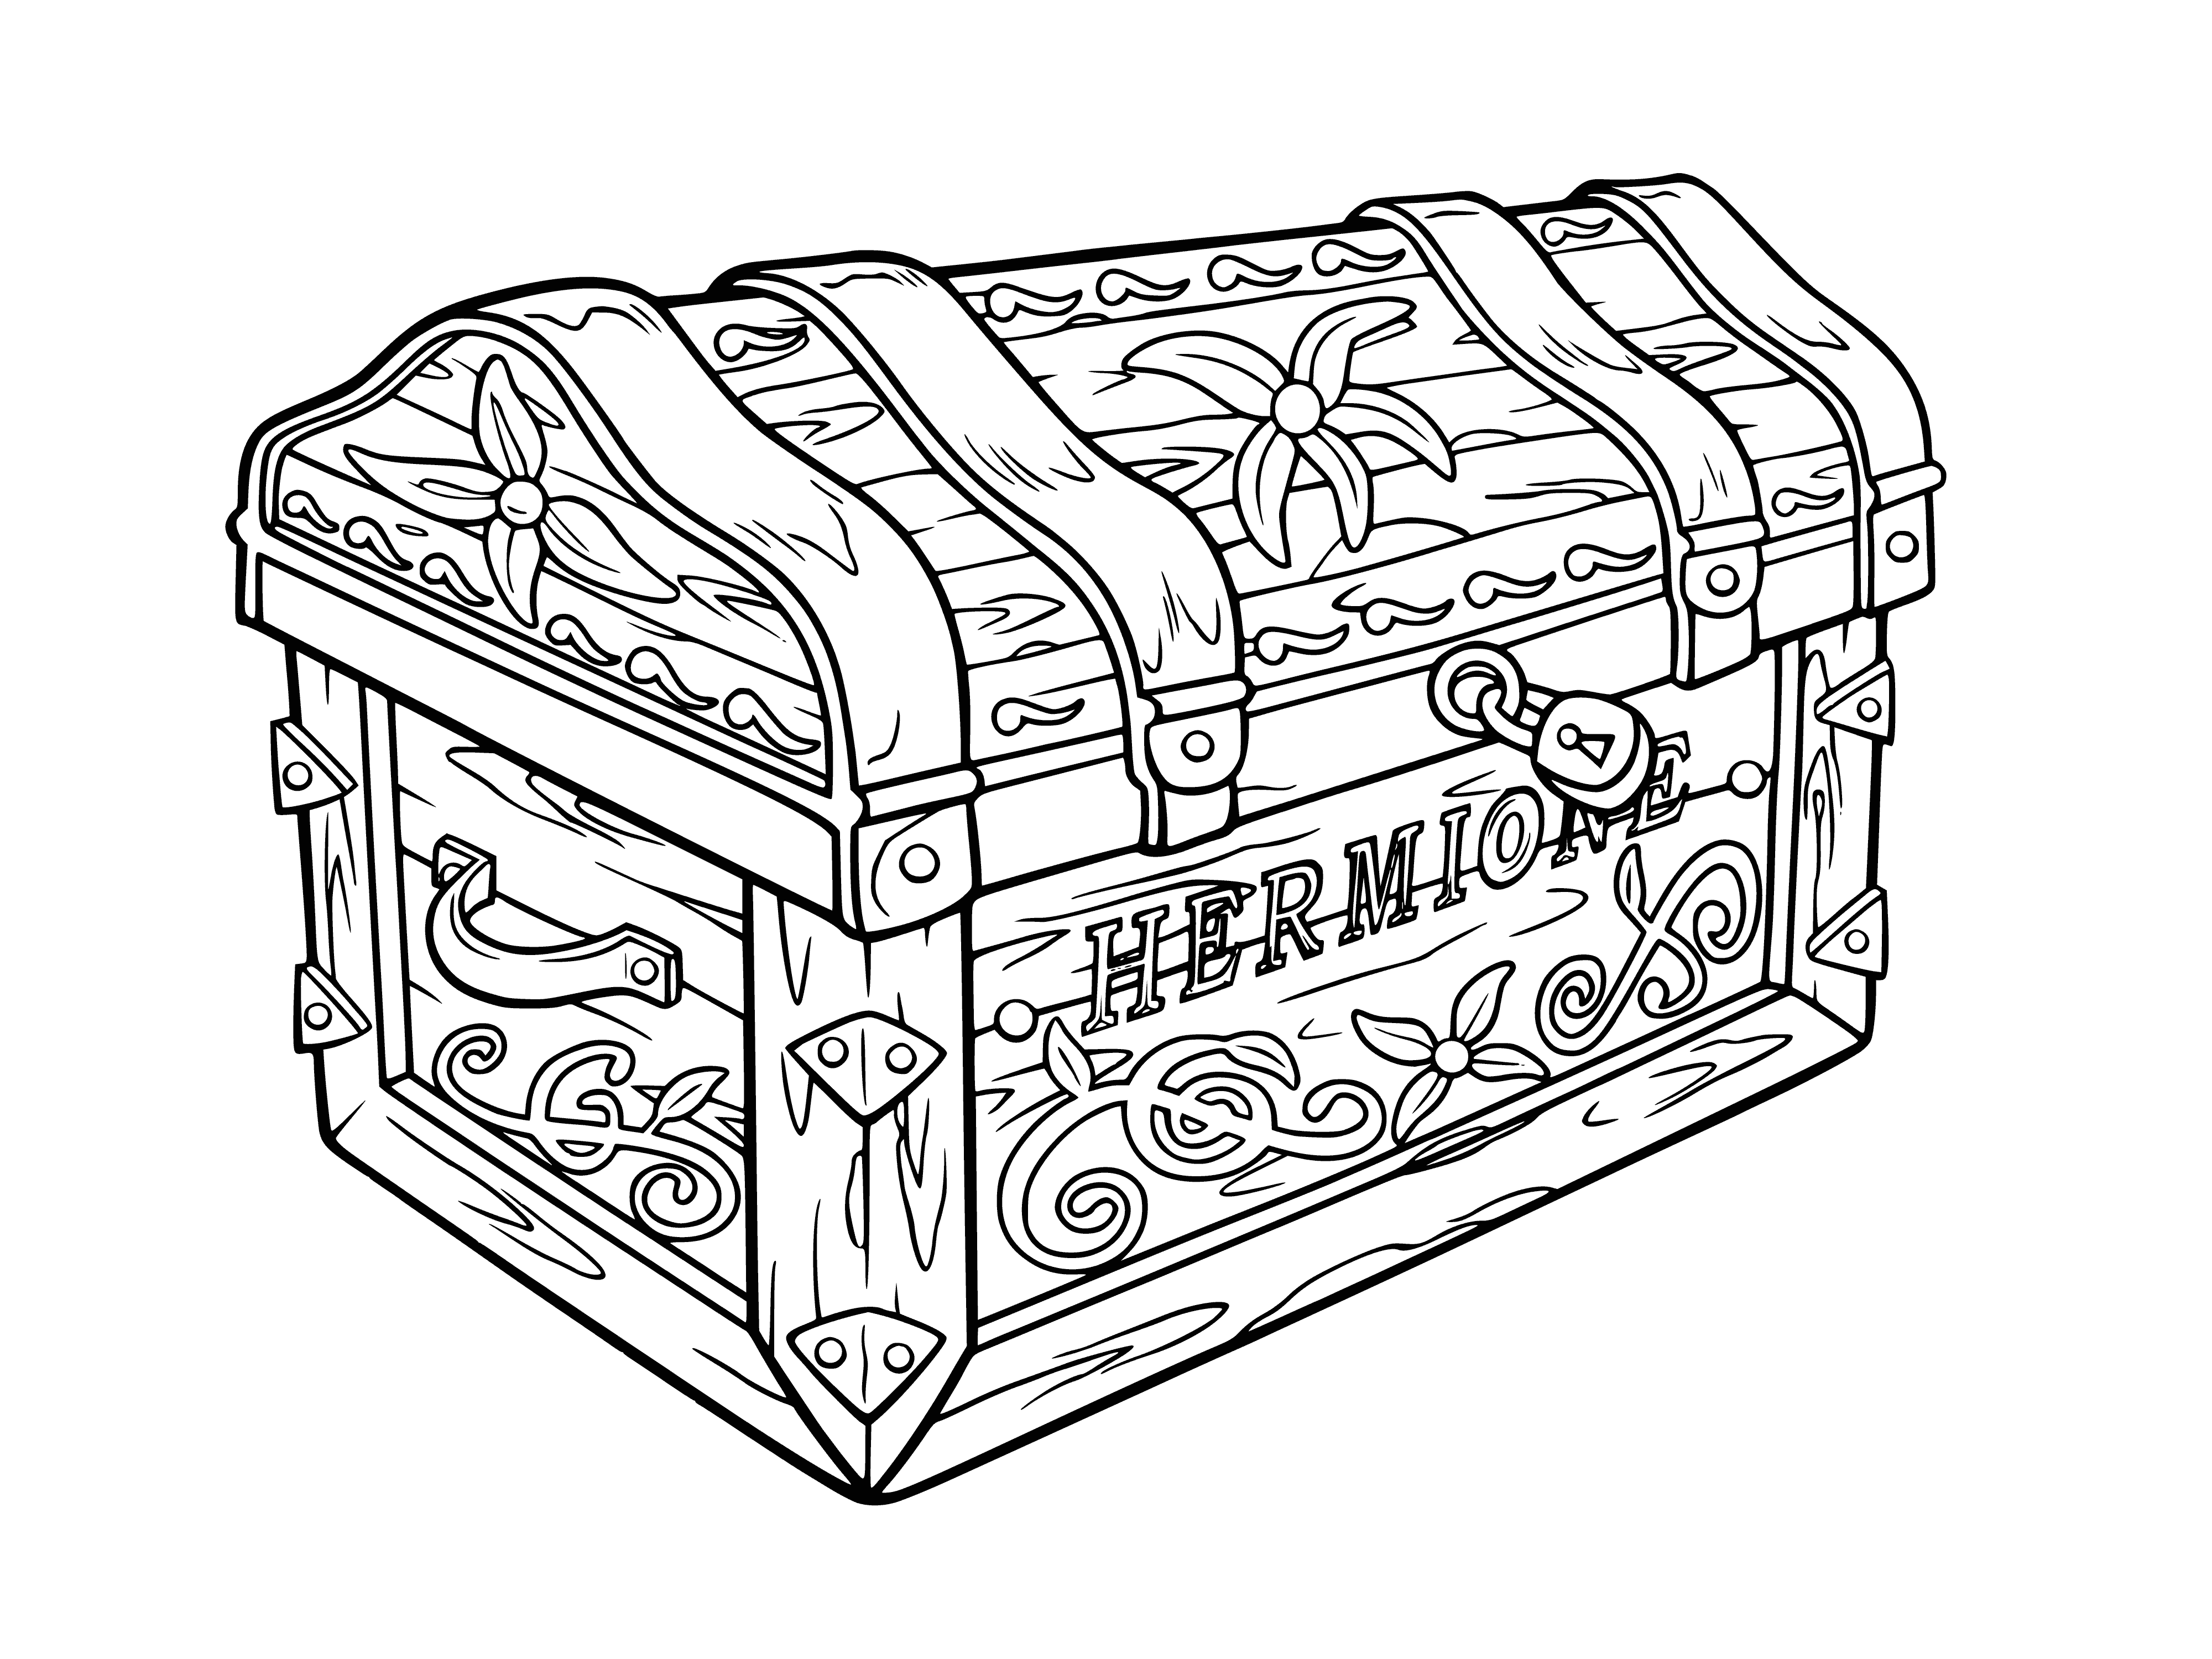 coloring page: Girl discovers chest full of books, scrolls & mysterious potions, looks triumphant.